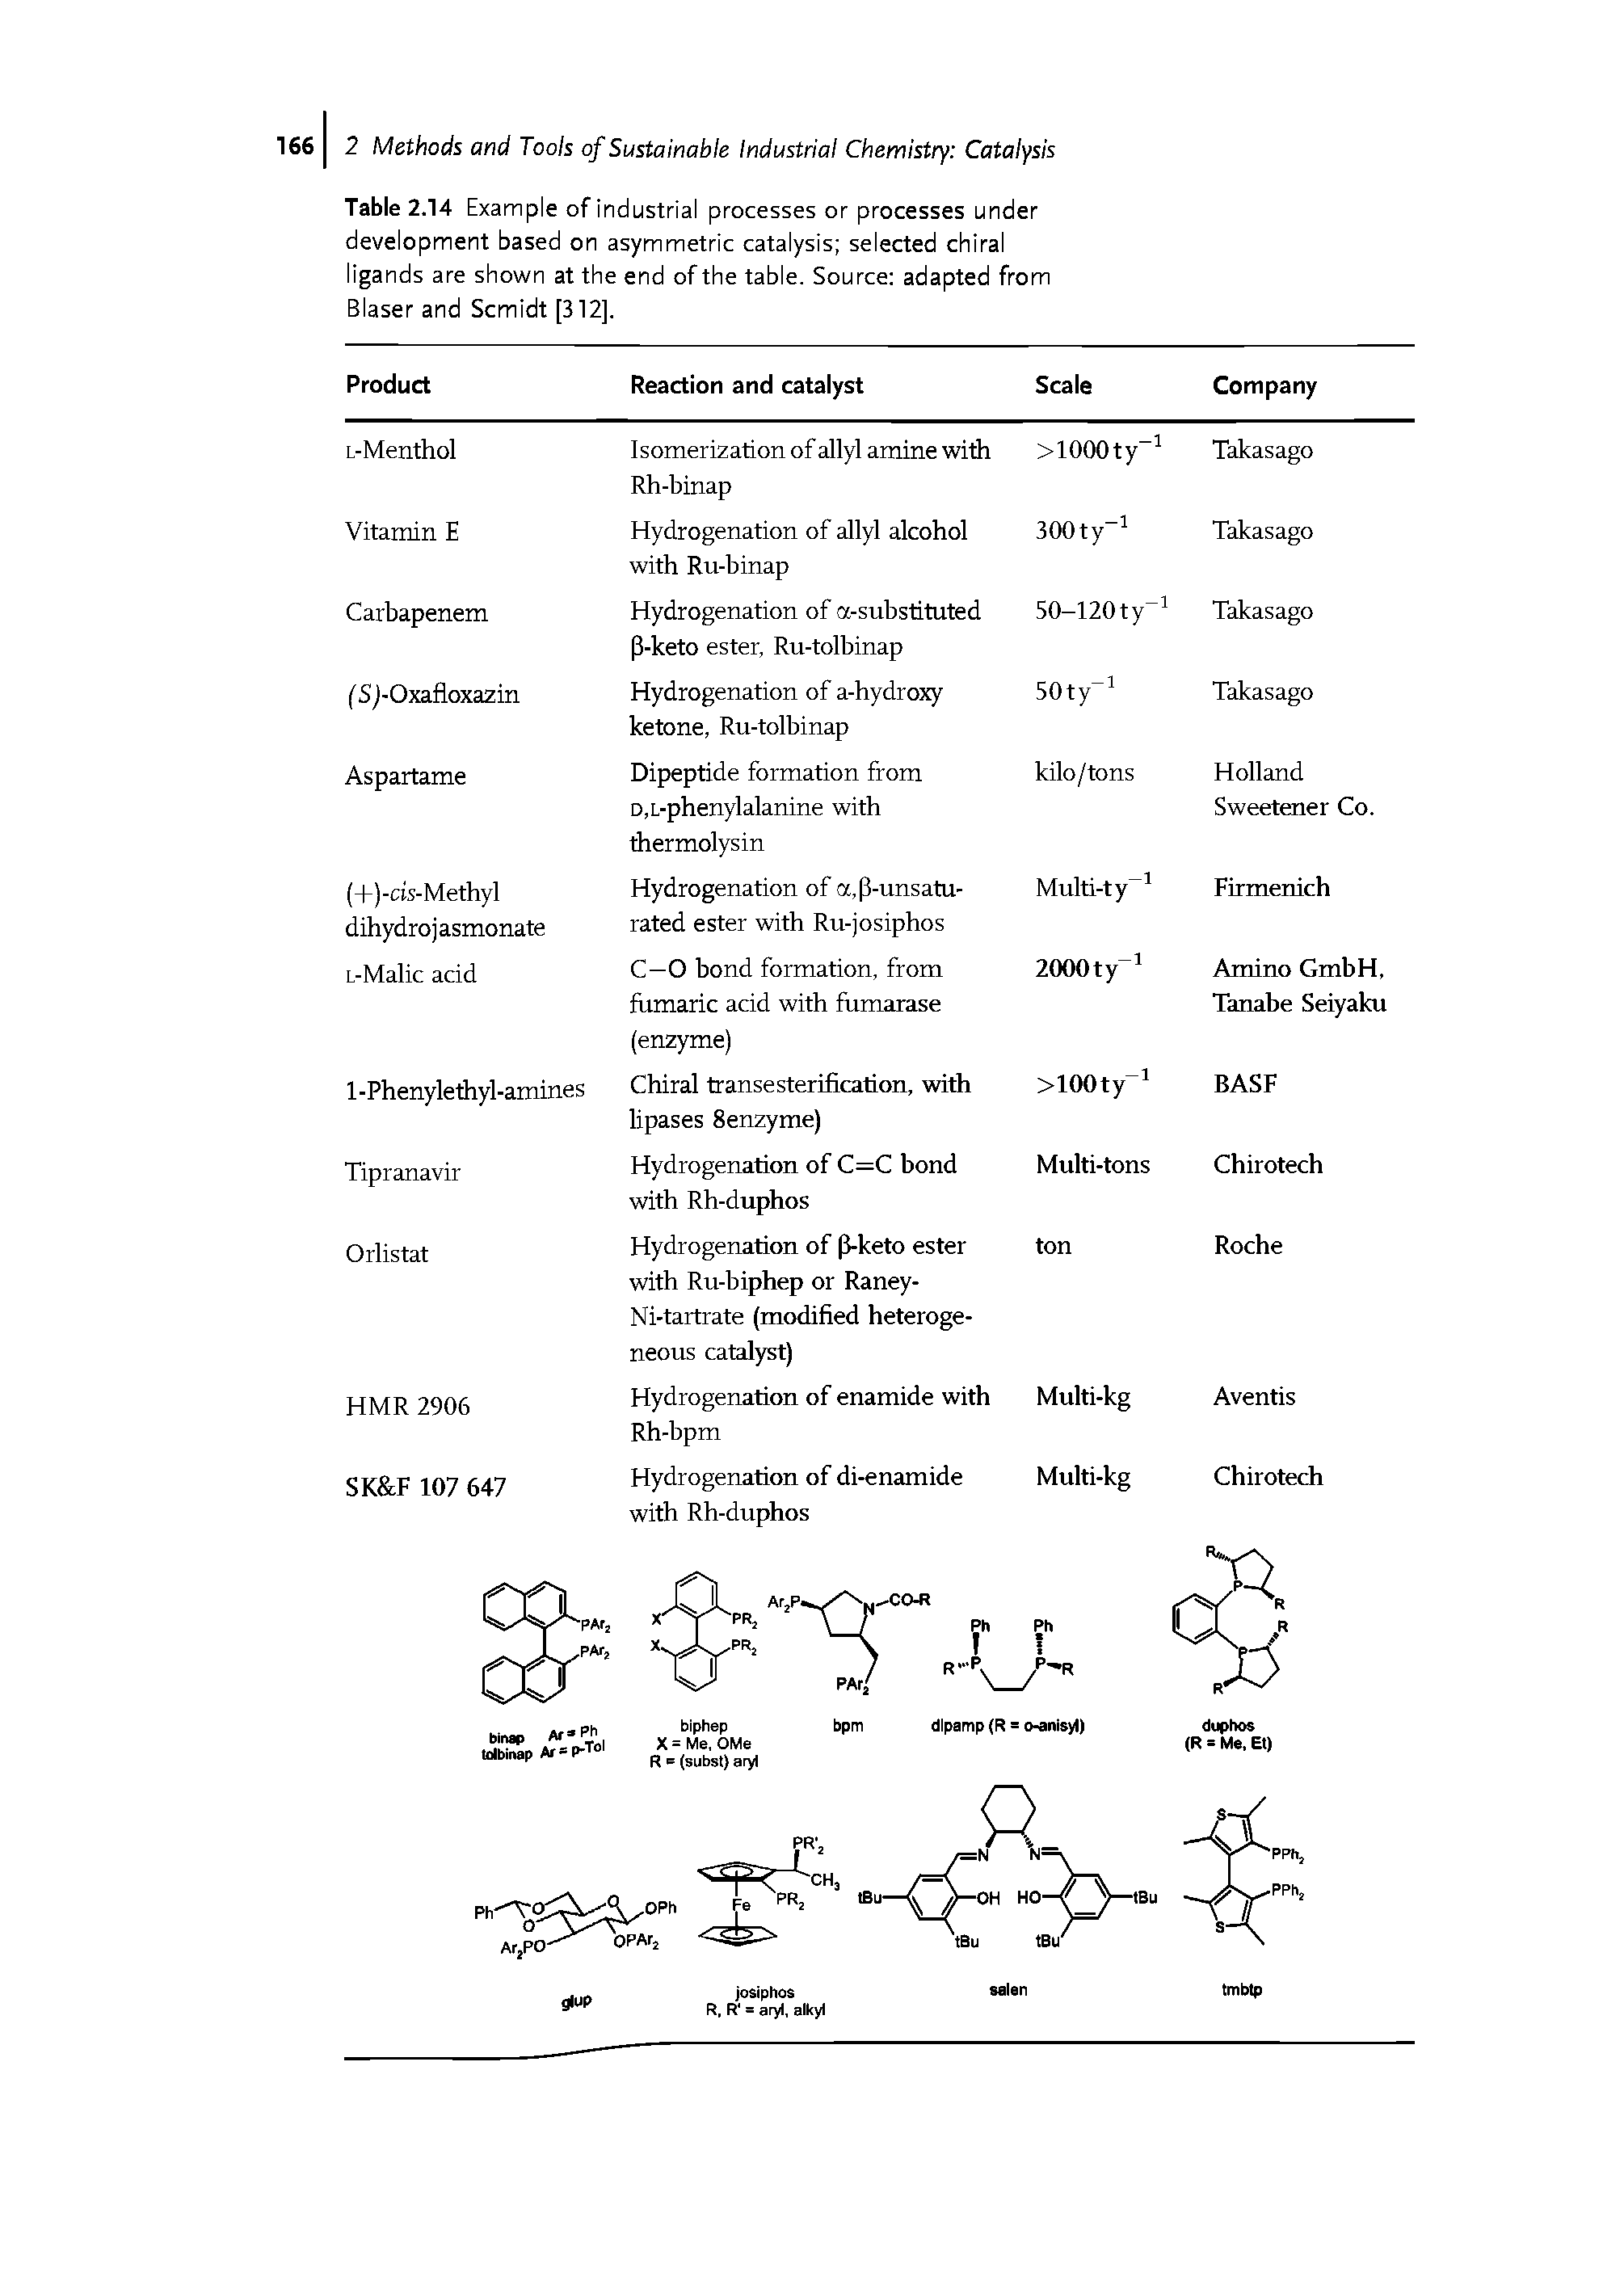 Table 2.14 Example of industrial processes or processes under development based on asymmetric catalysis selected chiral ligands are shown at the end of the table. Source adapted from Blaser and Scmidt [312].